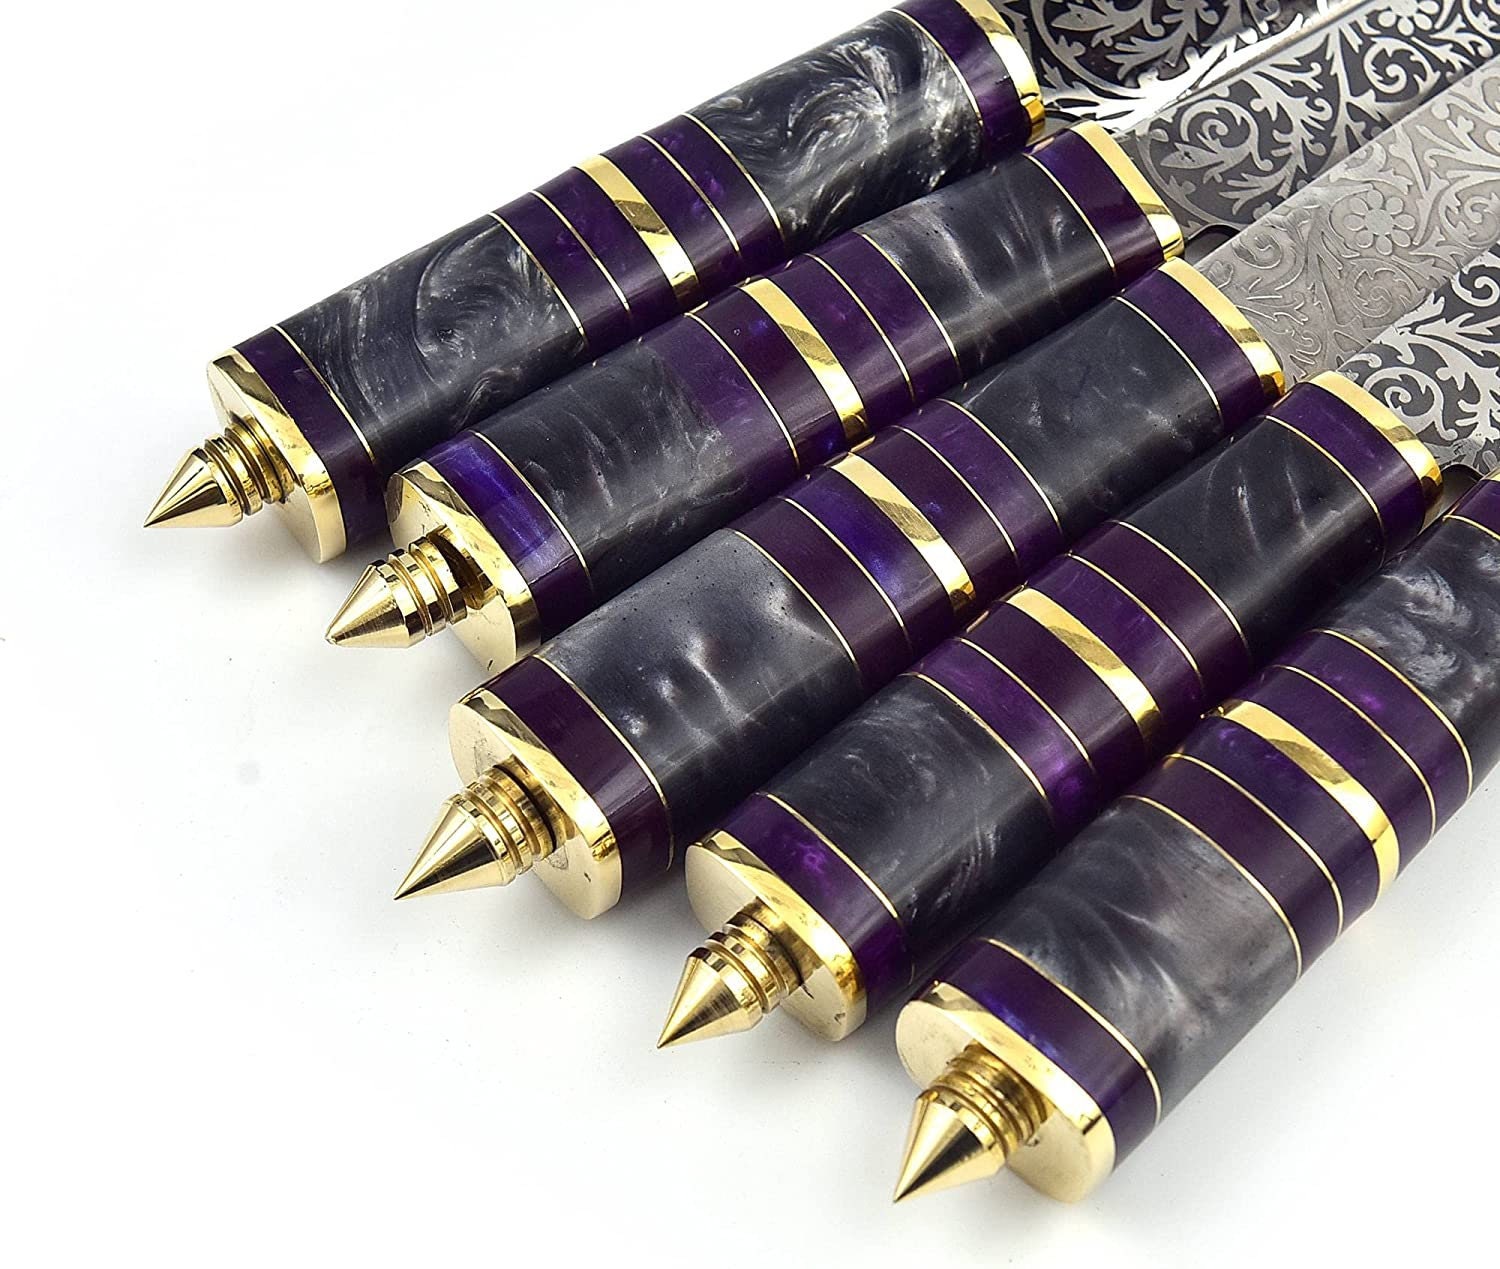 5 Pc Damascus Custom Handmade Professional Chef/bbq/kitchen Knife Set With  Purple Resin Handle With Leather Roll Kit Beautiful Gift for Him 